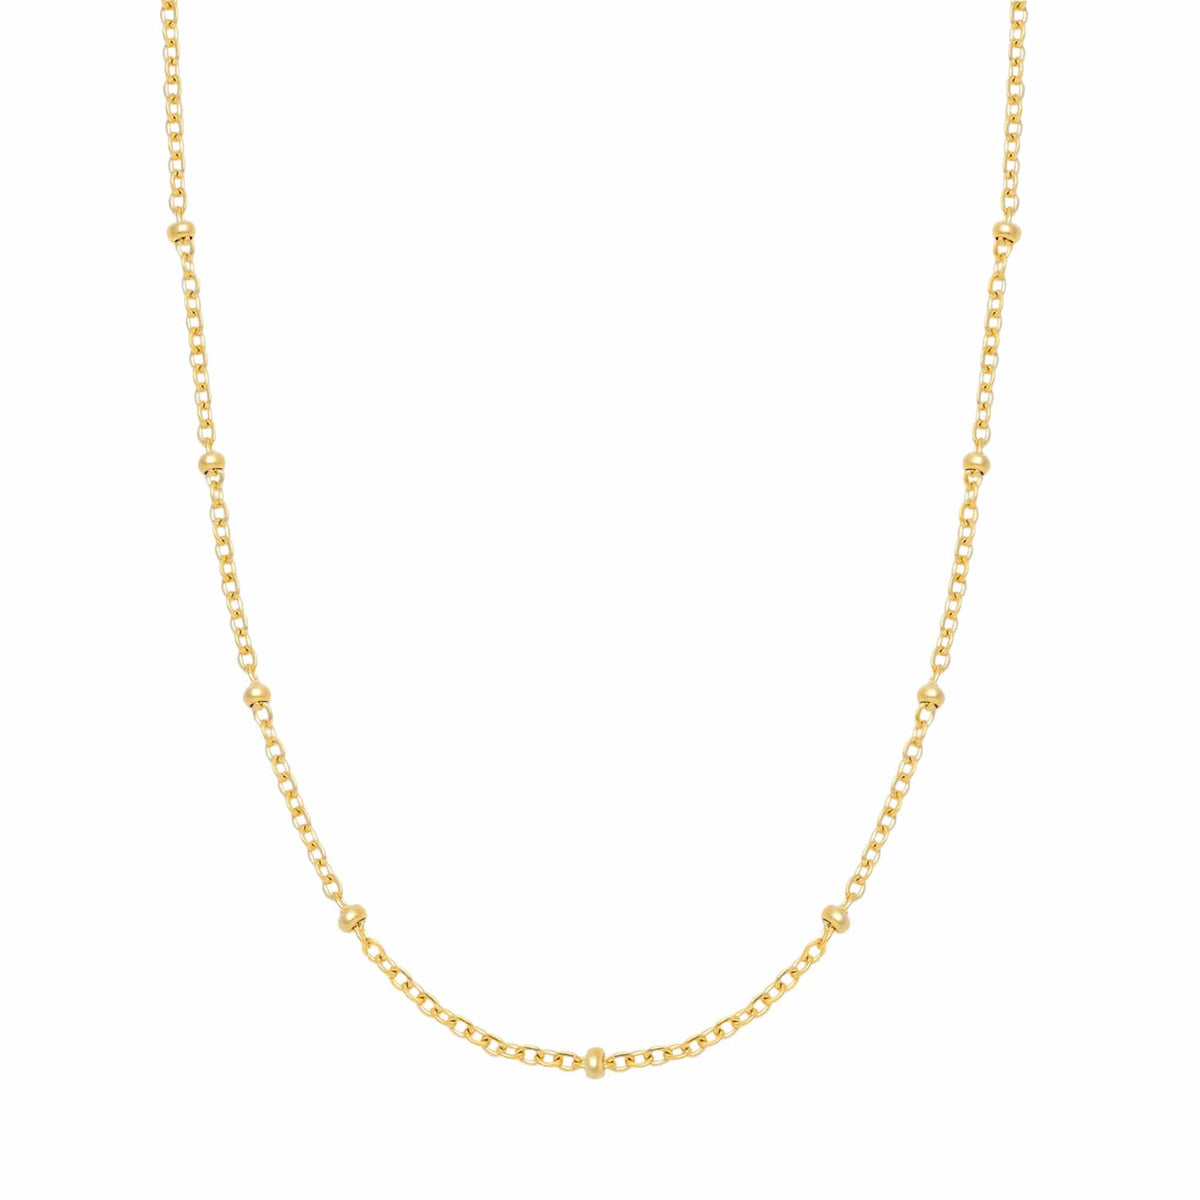 BohoMoon Stainless Steel Beaded Chain Gold